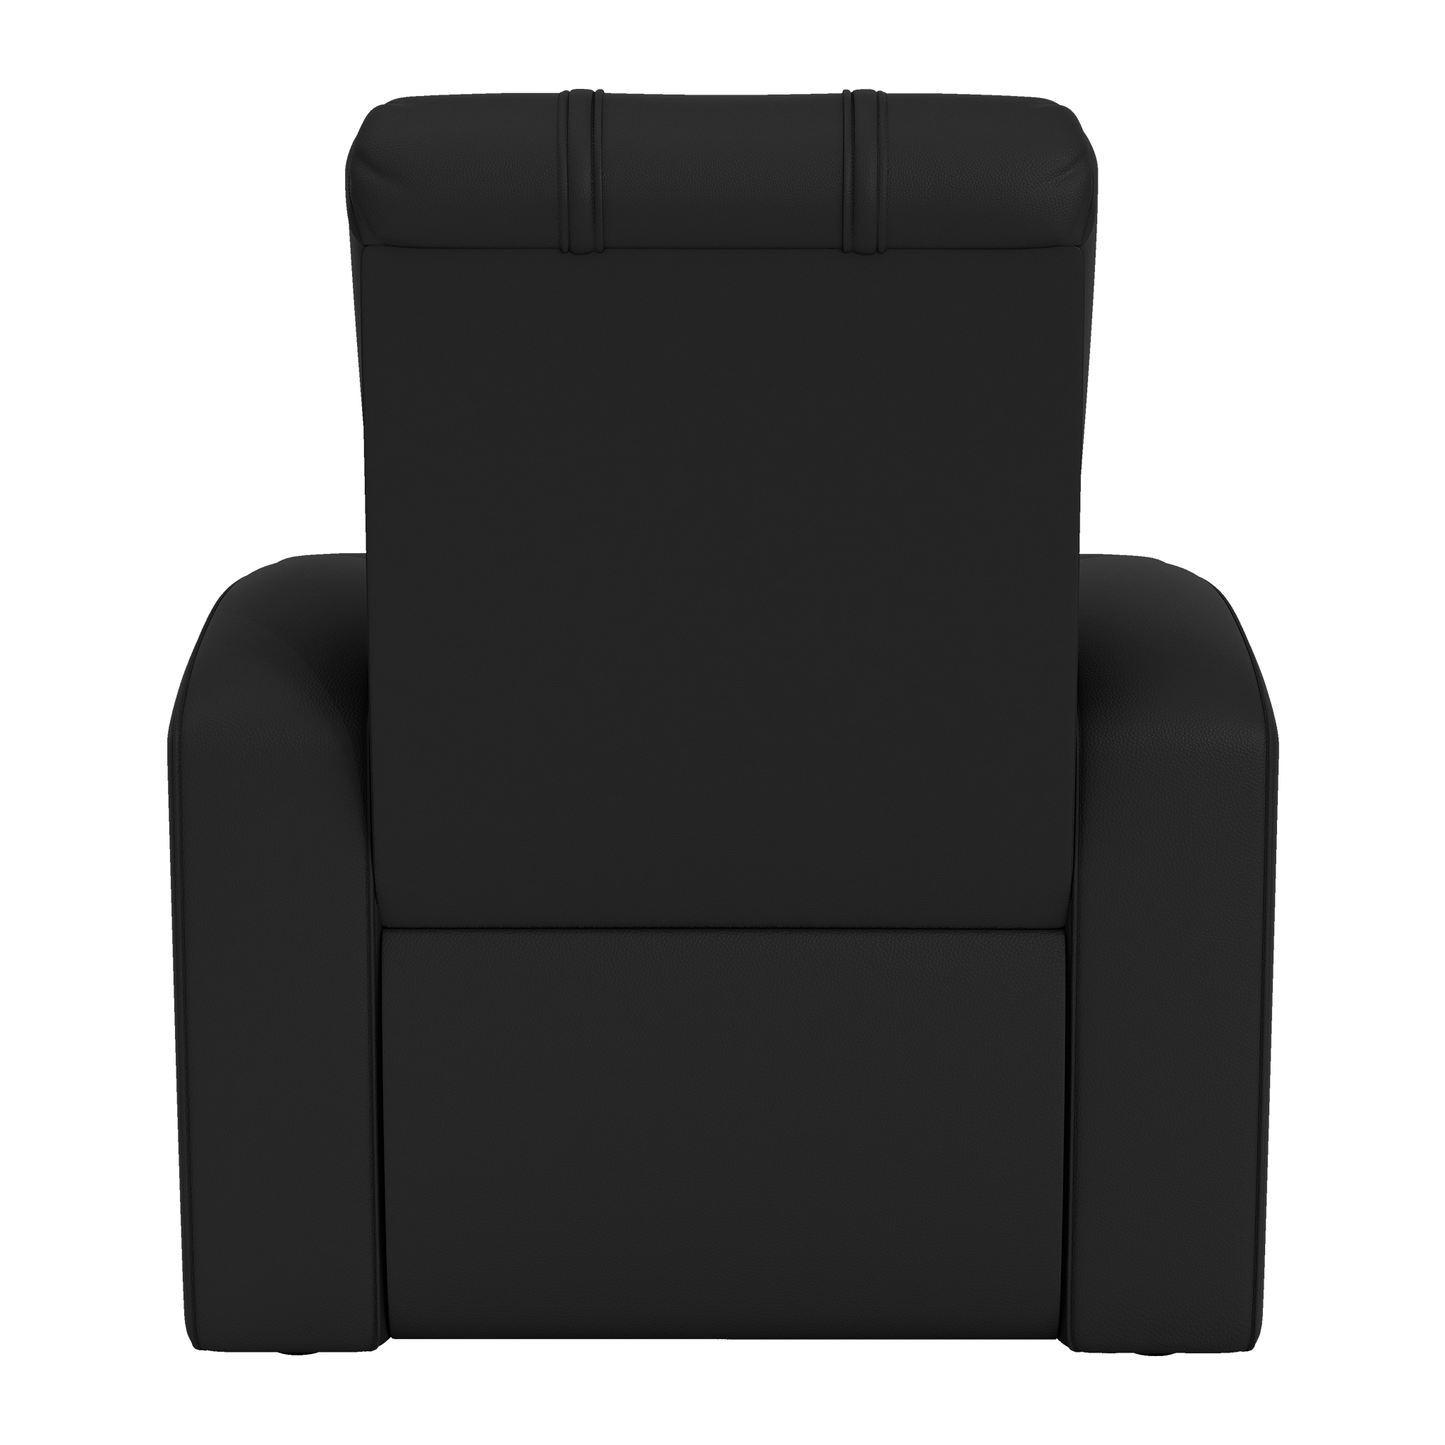 Relax Home Theater Recliner with Orlando City FC Logo